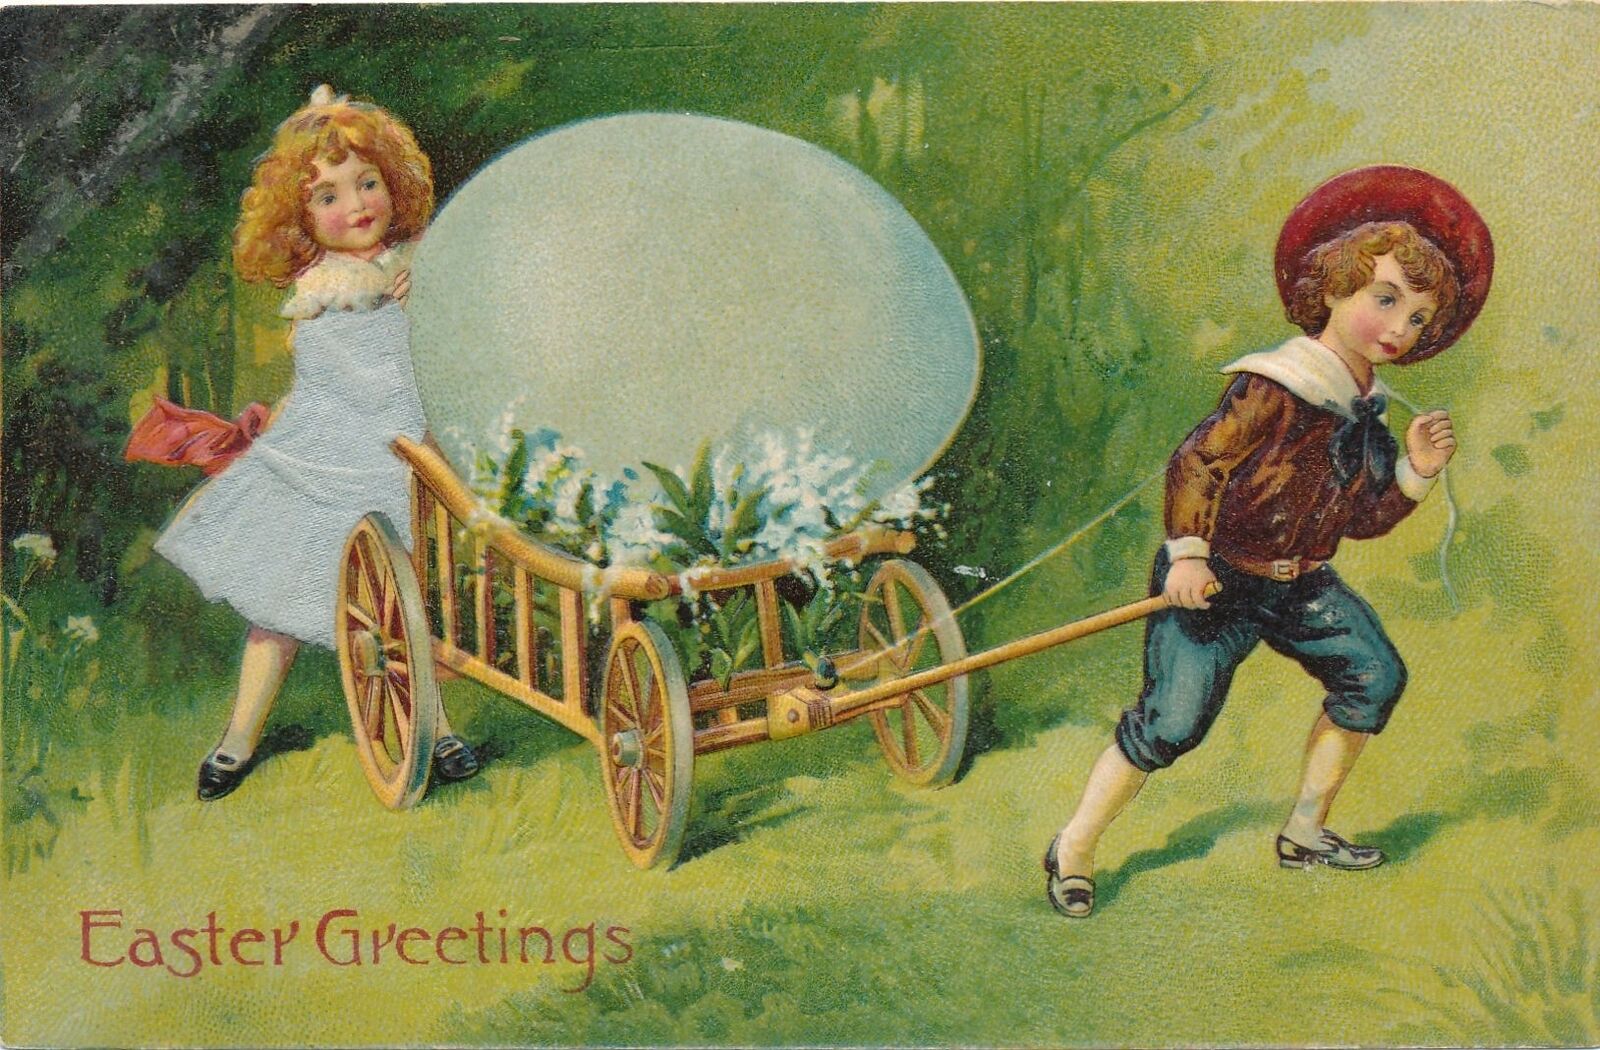 EASTER - Children With Huge Egg In Cart Silk Covered Easter Greetings